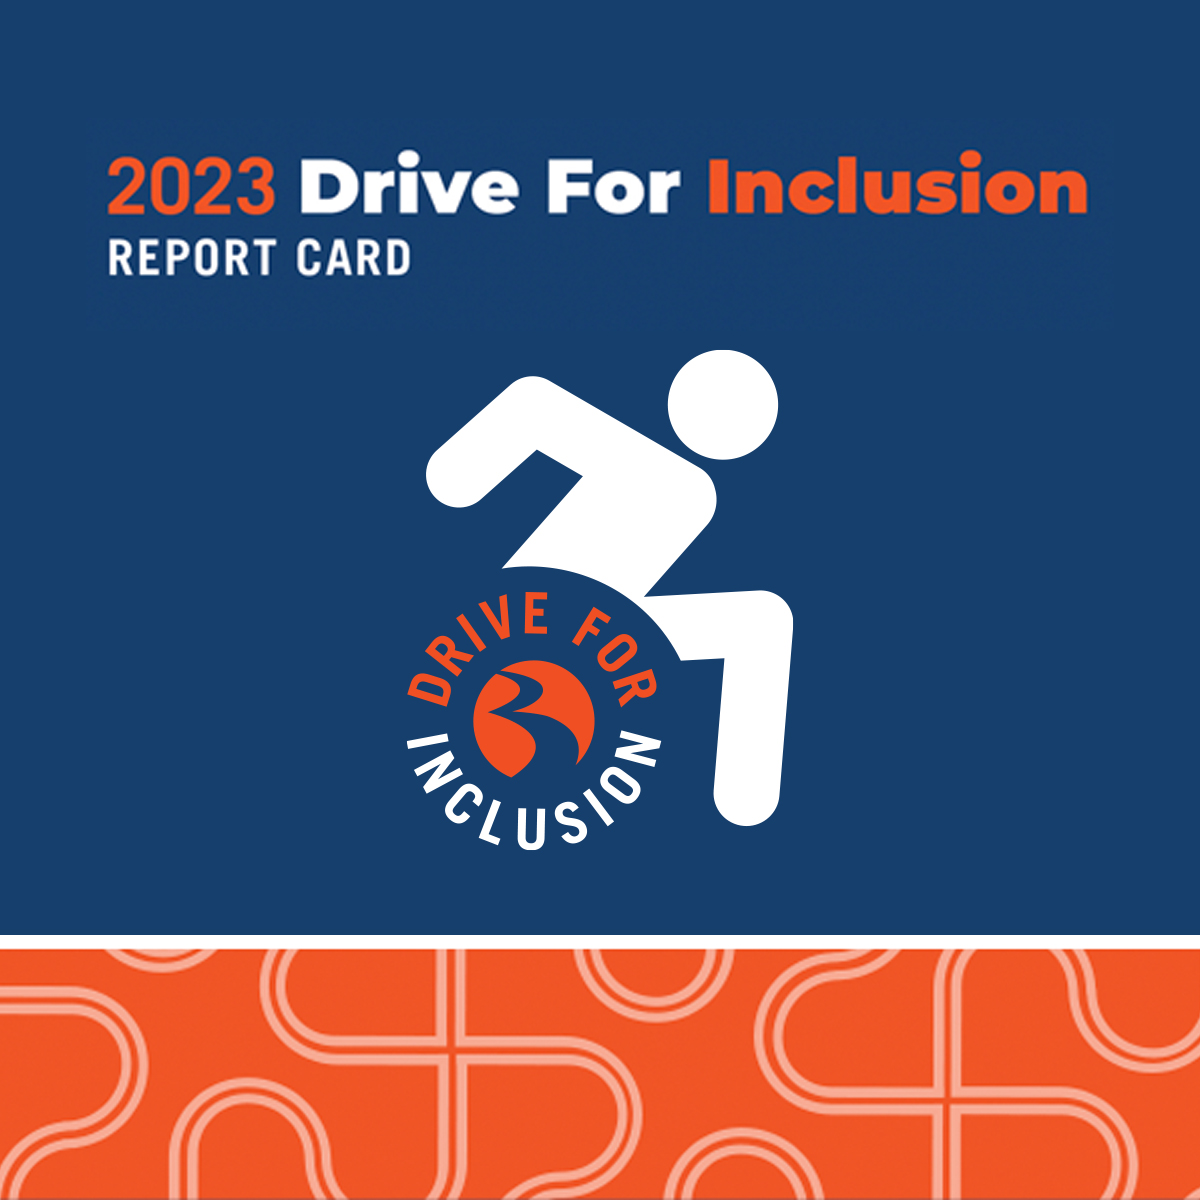 BraunAbility's 2023 Drive for Inclusion Report Card